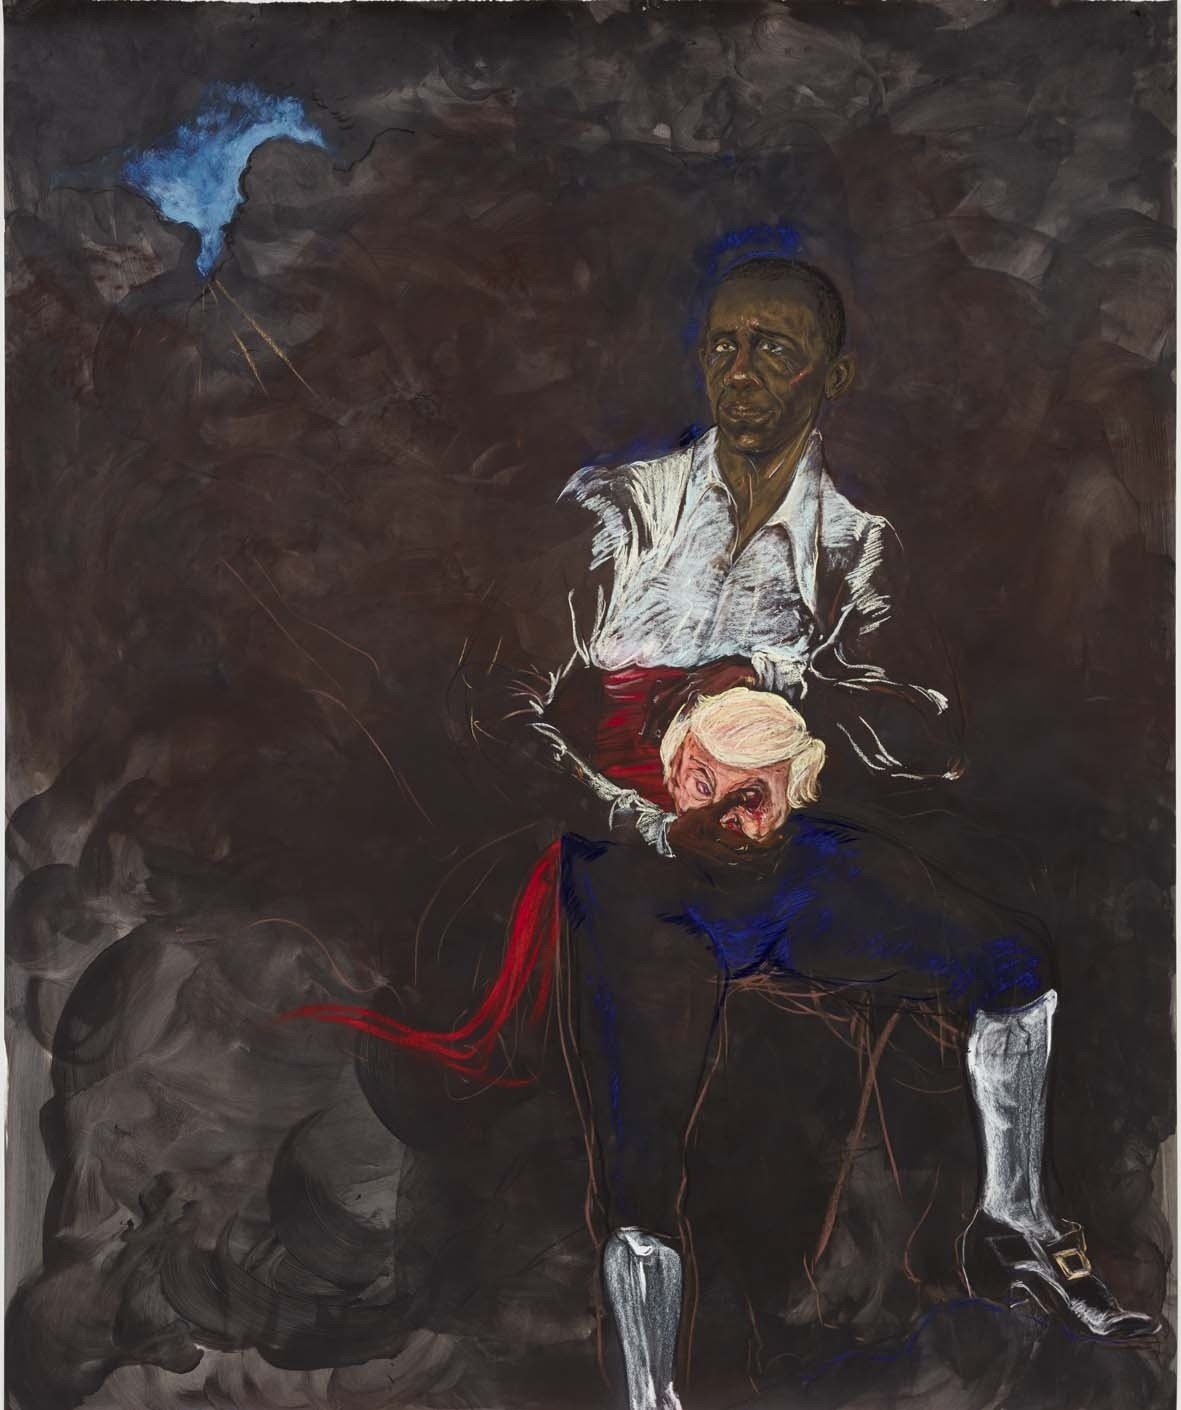 Barack Obama as Othello "The Moor" wird the Severed Head of Iago in  a New and Revised Ending by Kara E. Walker. 2019. Pastell, Kreide und Kohle auf grundiertem Papier. 221.9 x 182.9 cm. The Joiner/Guiffrida Collection, San Francisco.